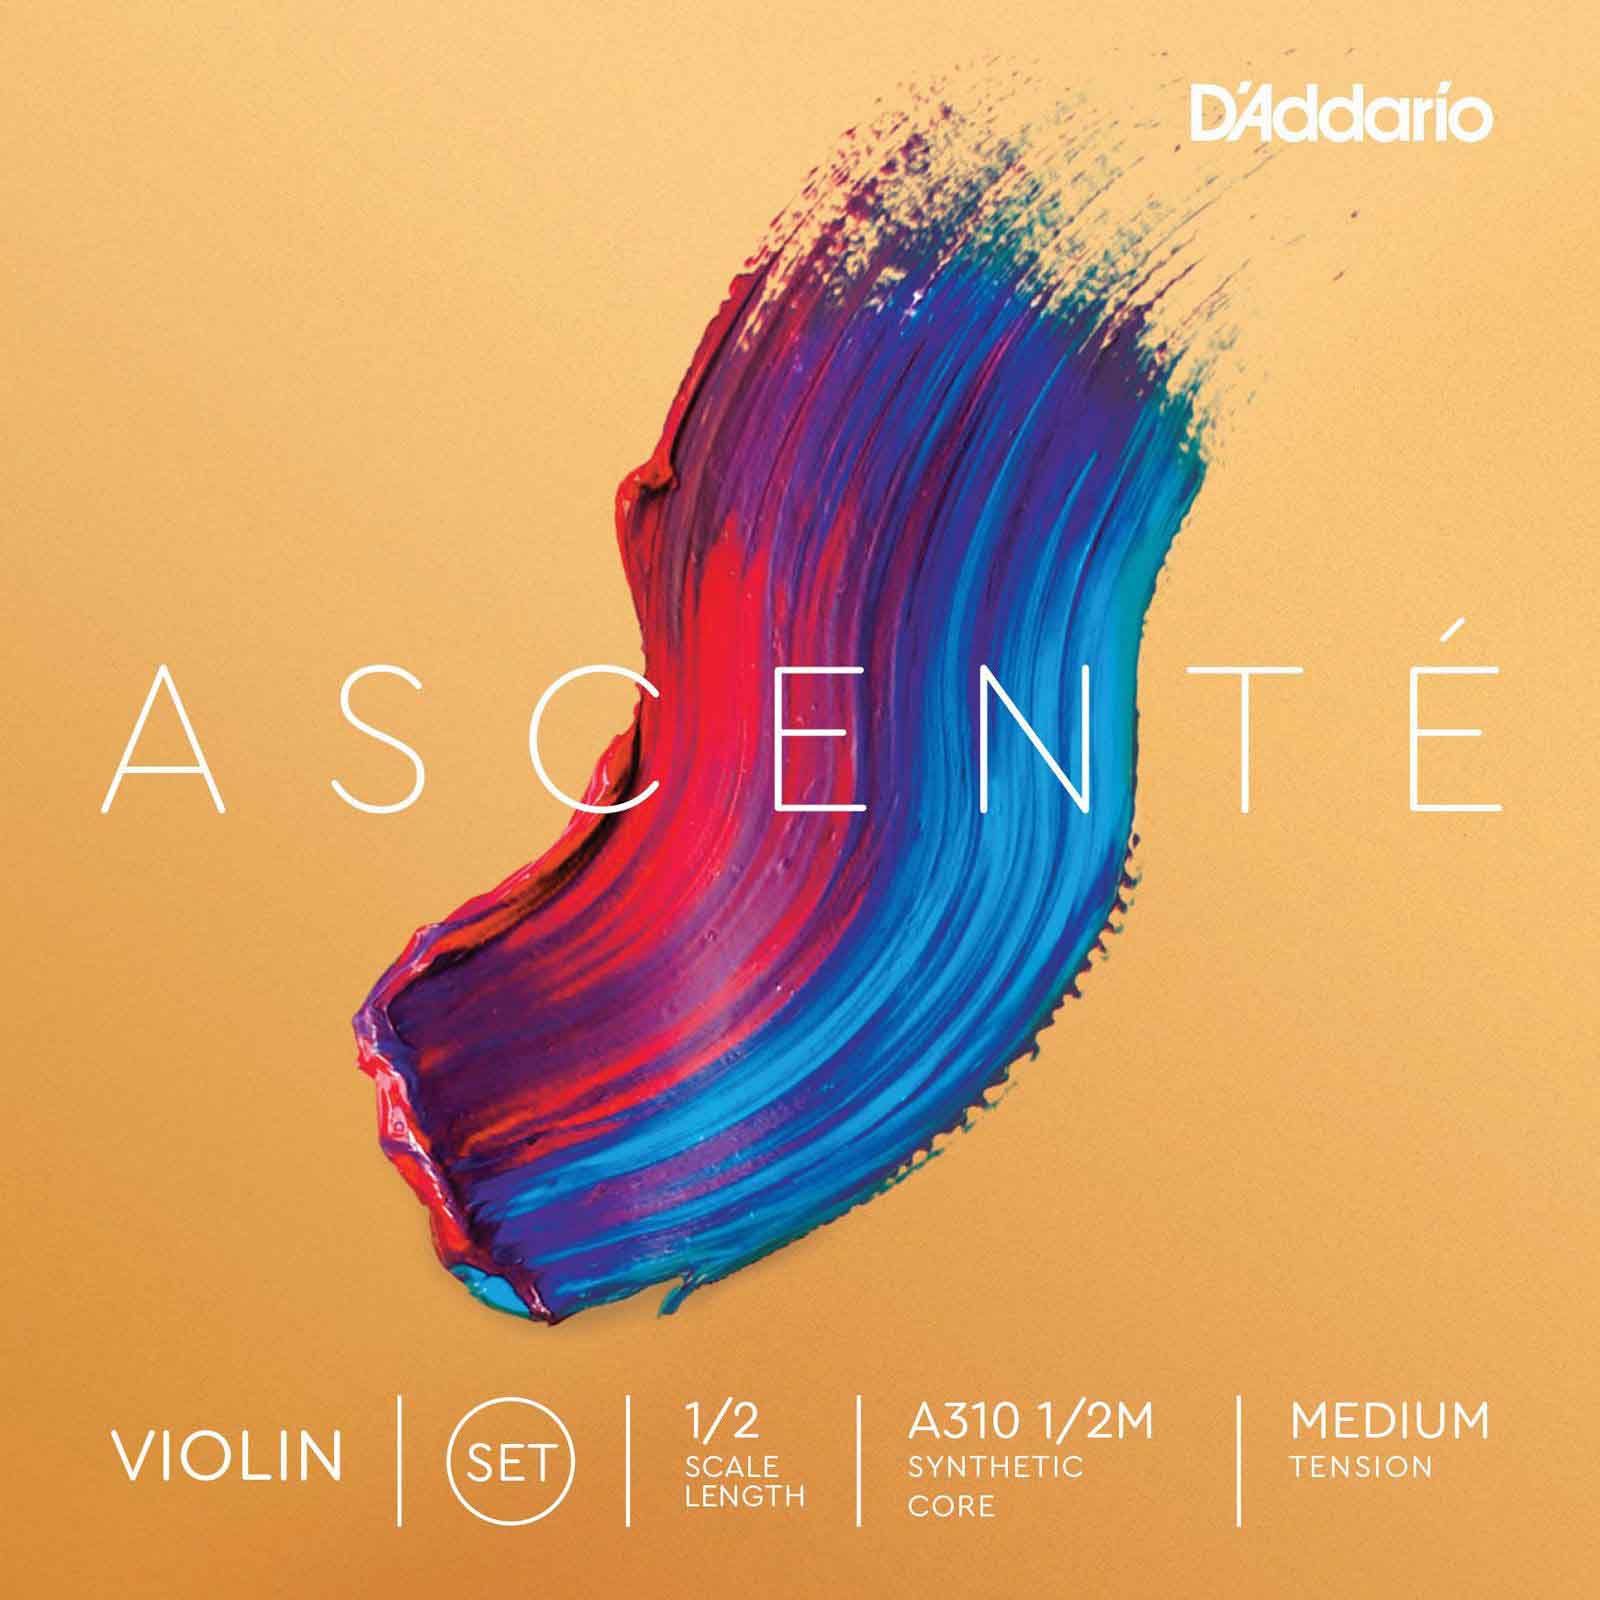 D'ADDARIO AND CO SET OF STRINGS FOR VIOLIN 1/2 ASCENTE TENSION MEDIUM